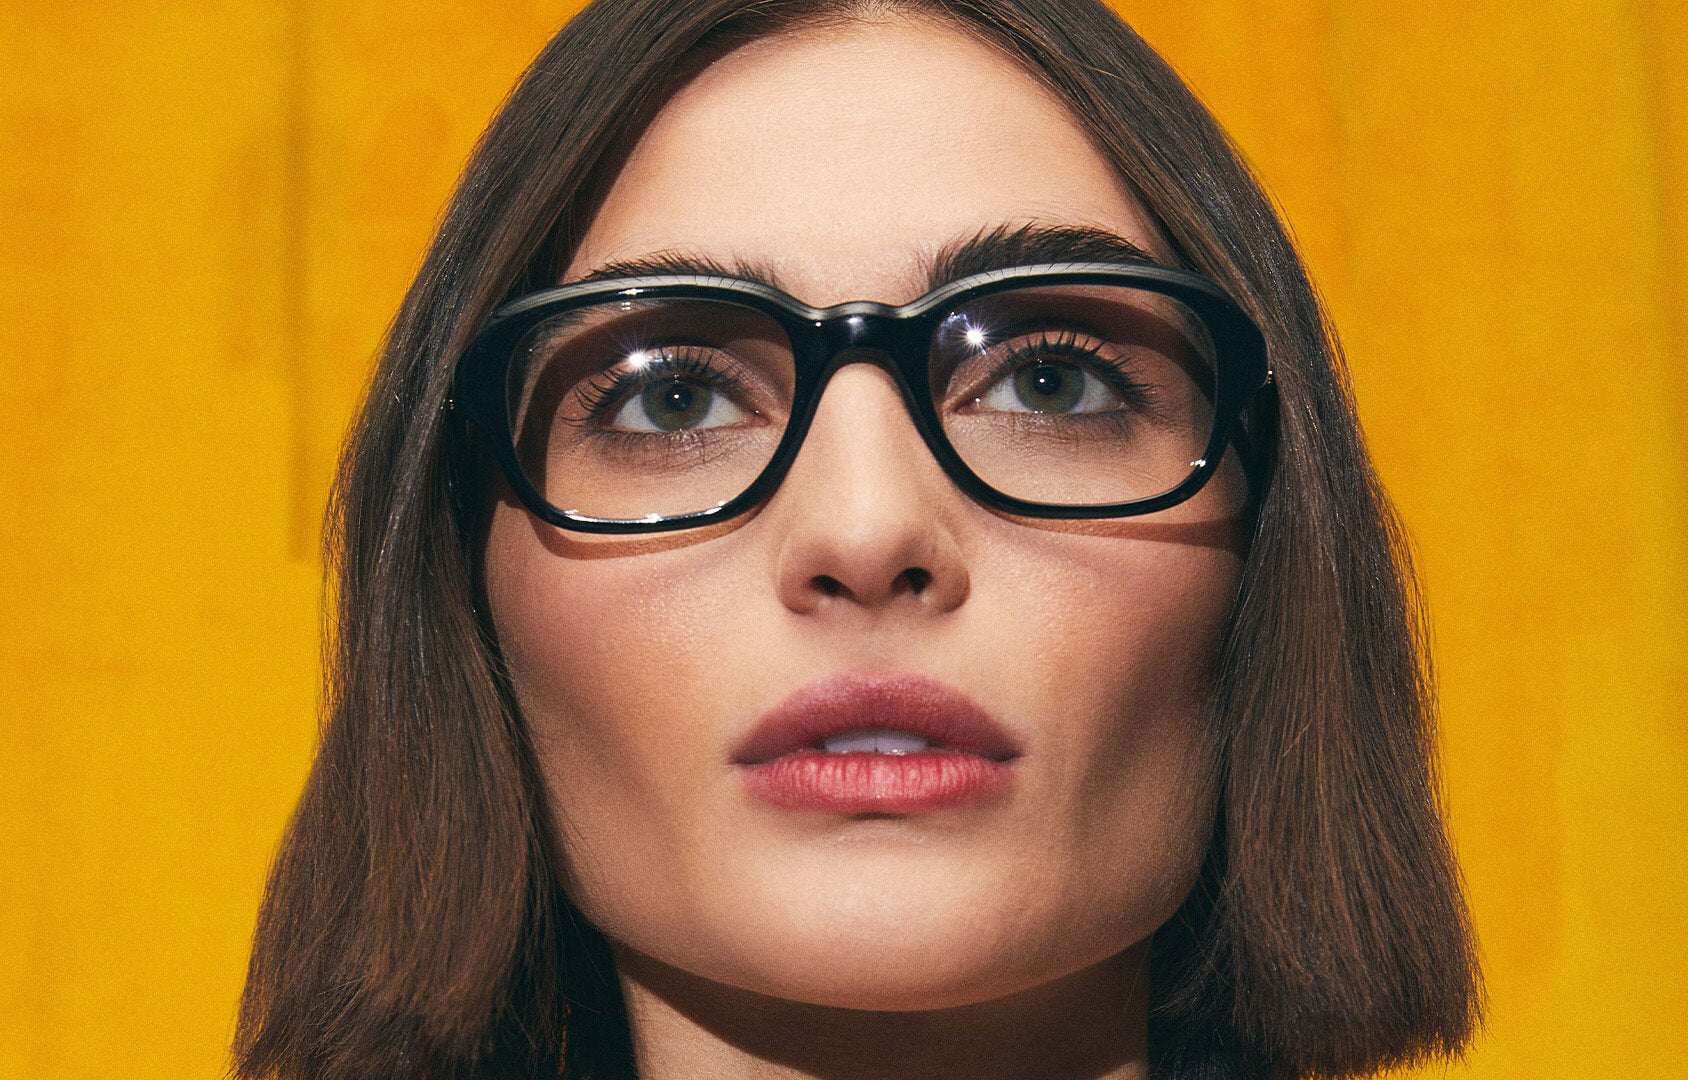 MOSCOT unveils 6 new classiconic™